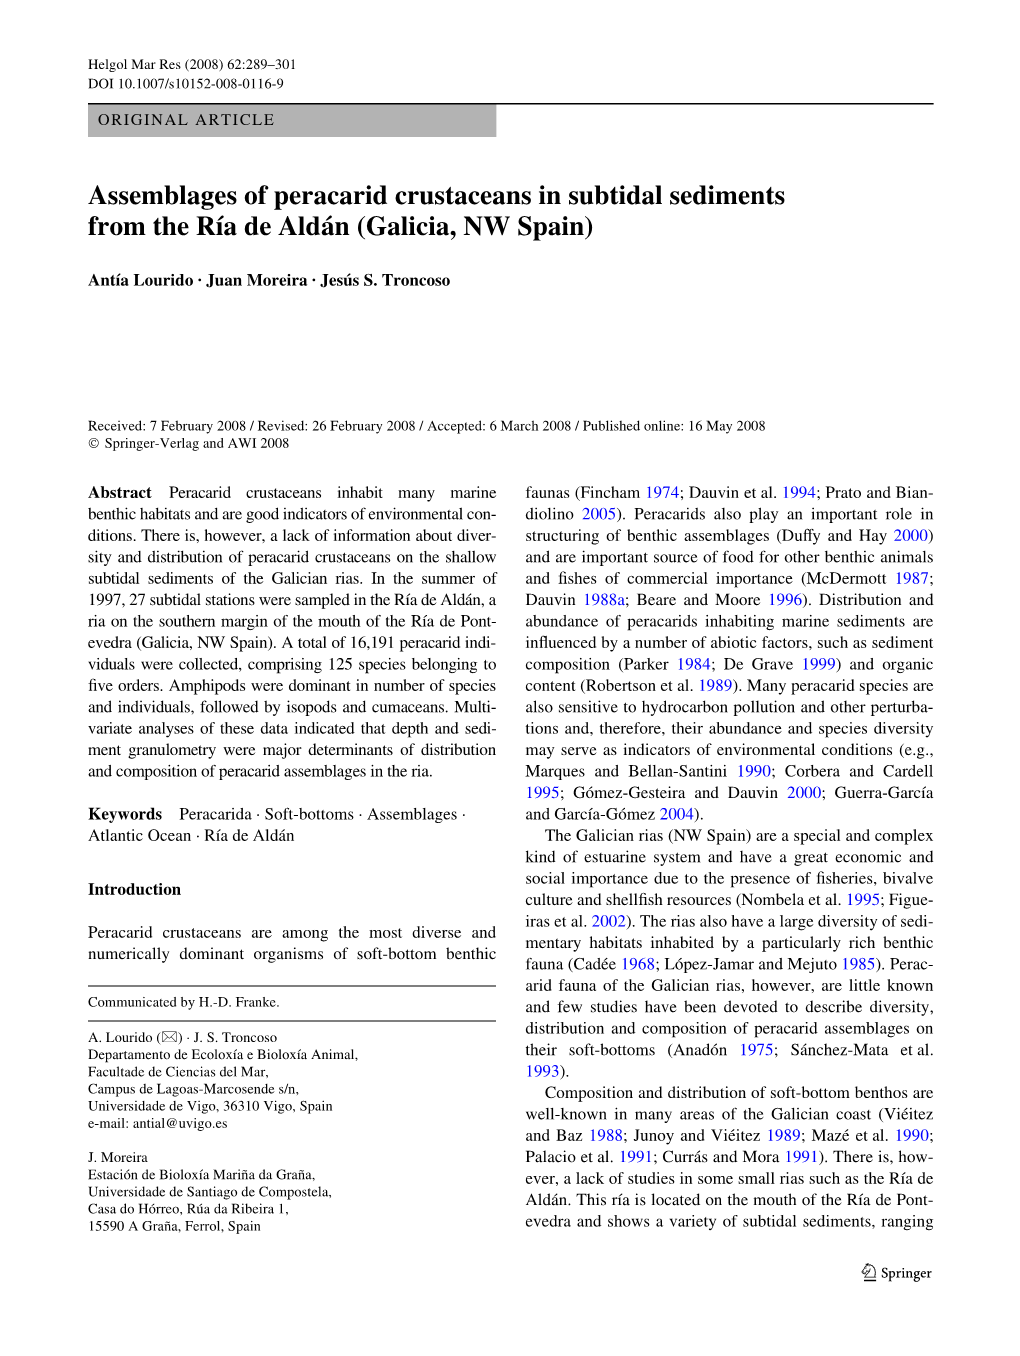 Assemblages of Peracarid Crustaceans in Subtidal Sediments from the Ría De Aldán (Galicia, NW Spain)